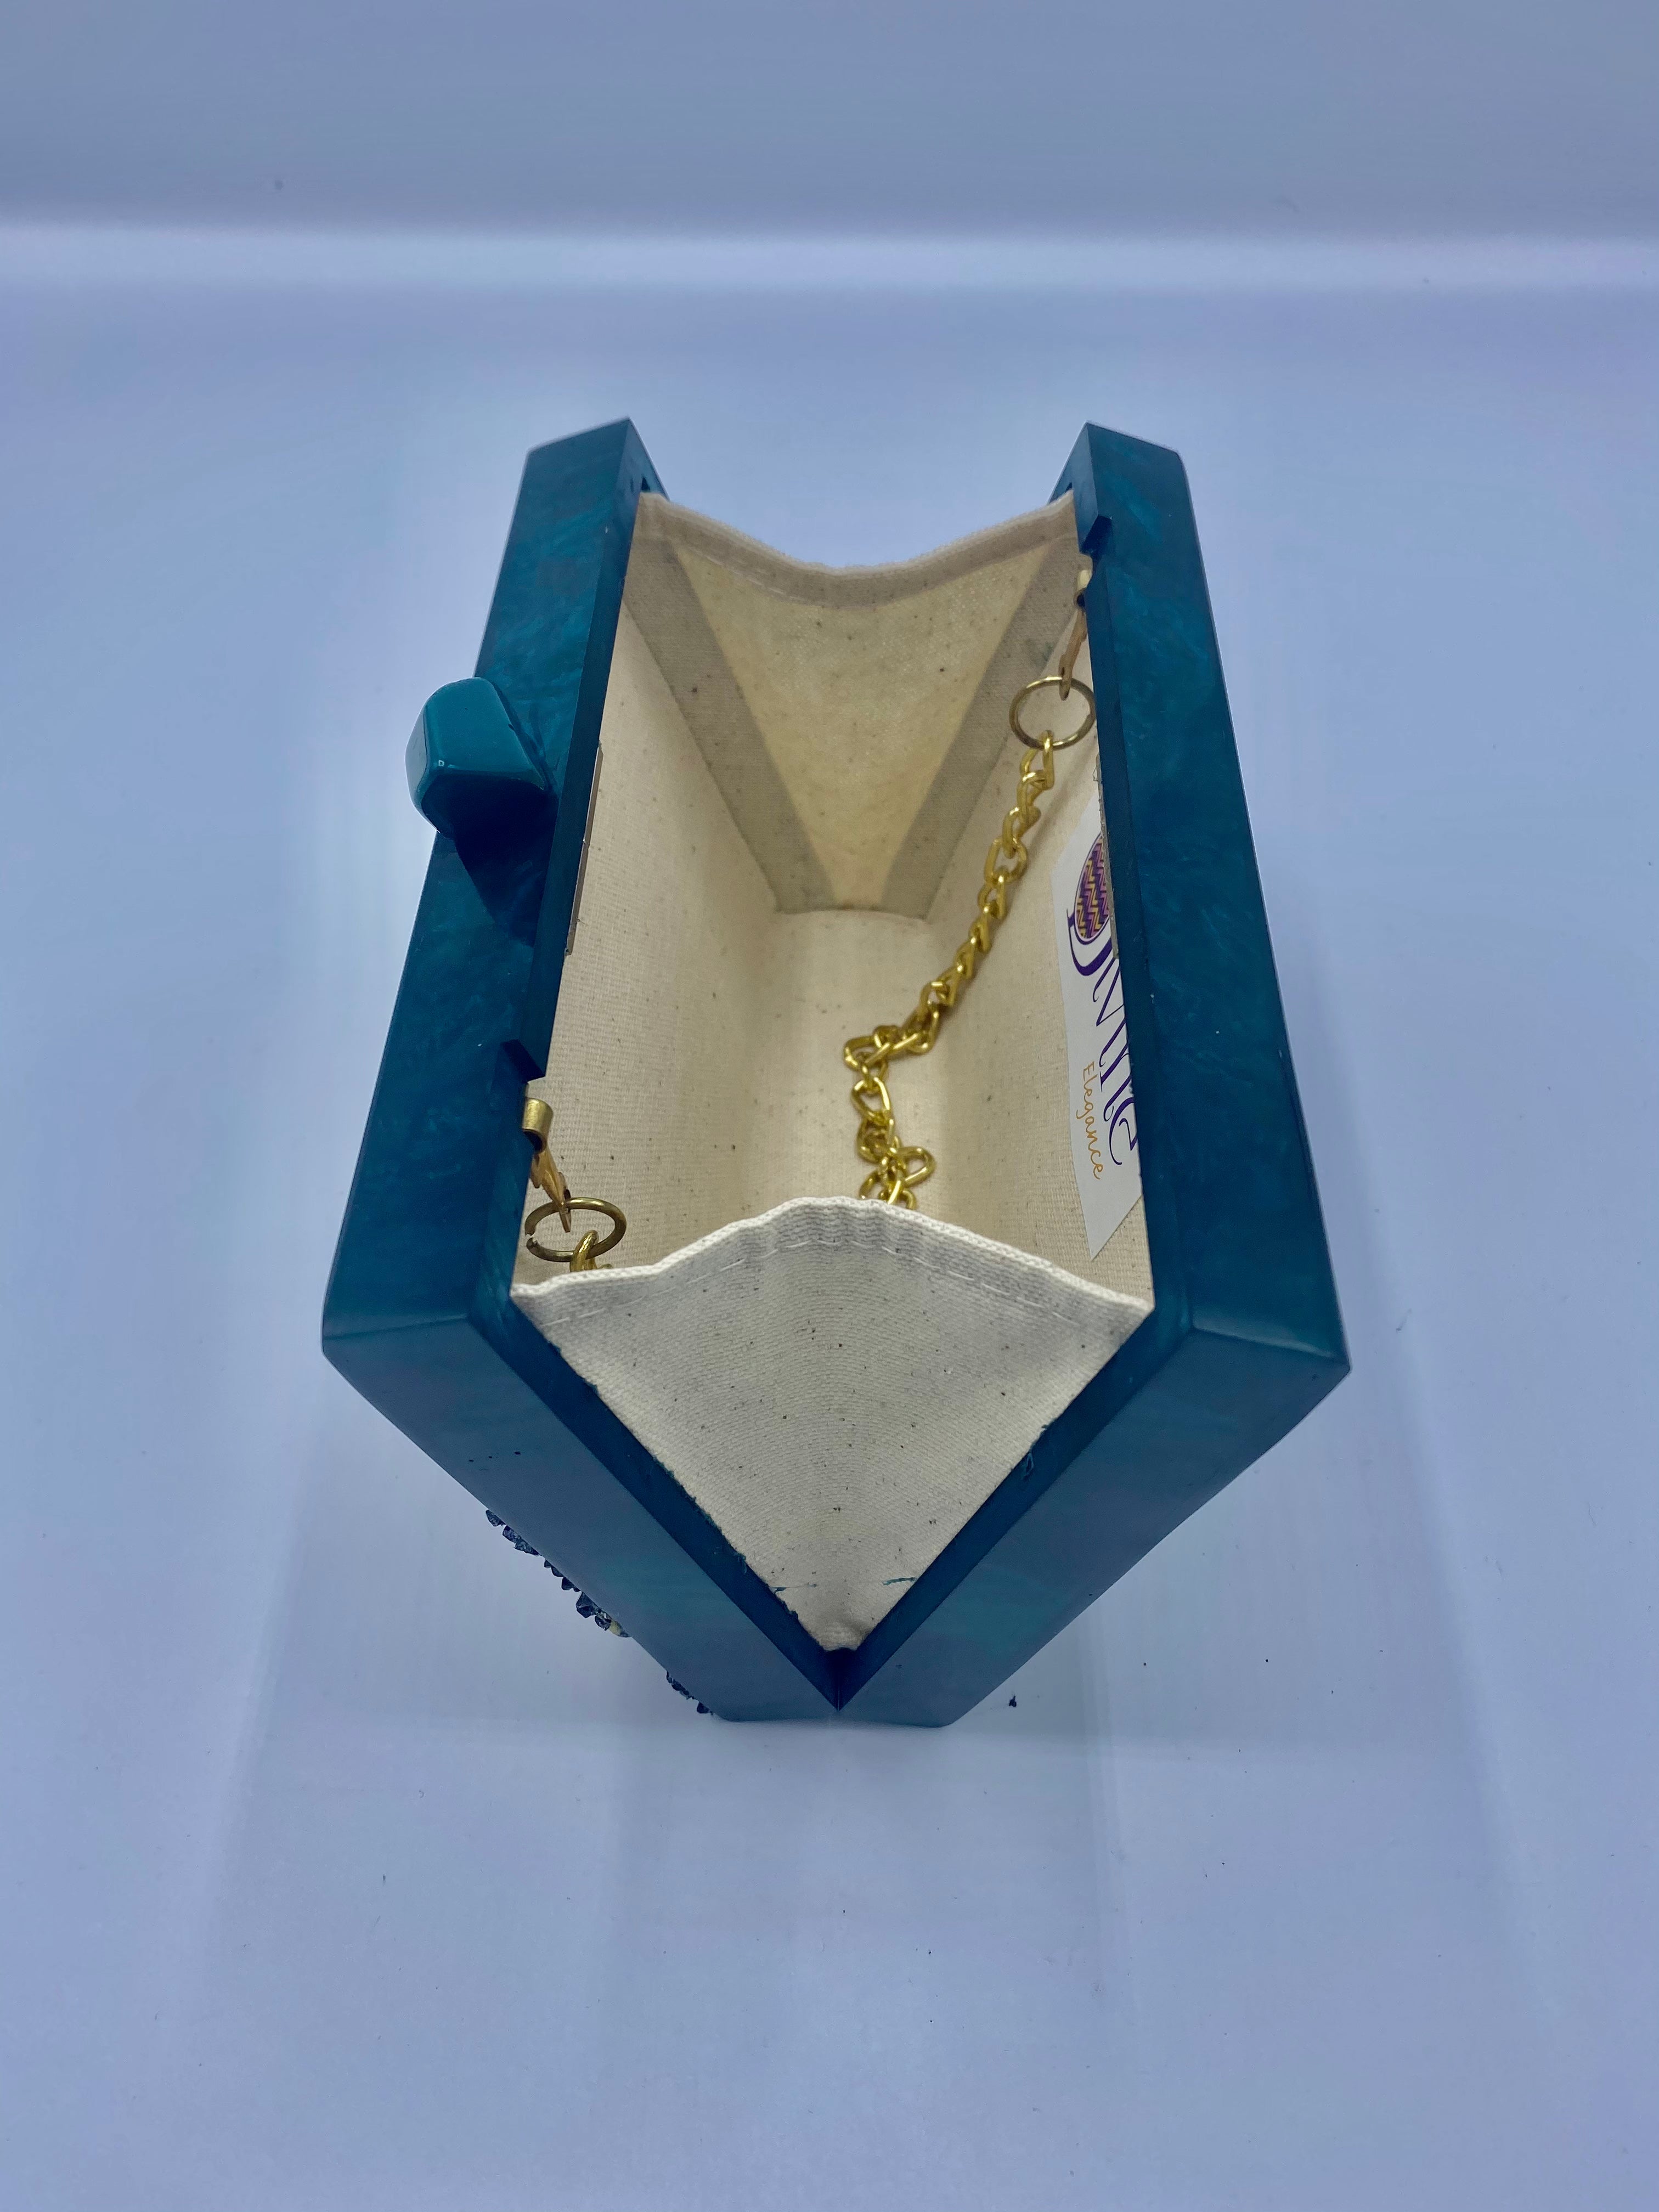 Handcrafted Triangle Resin with embellishment of pearls and stones Clutch